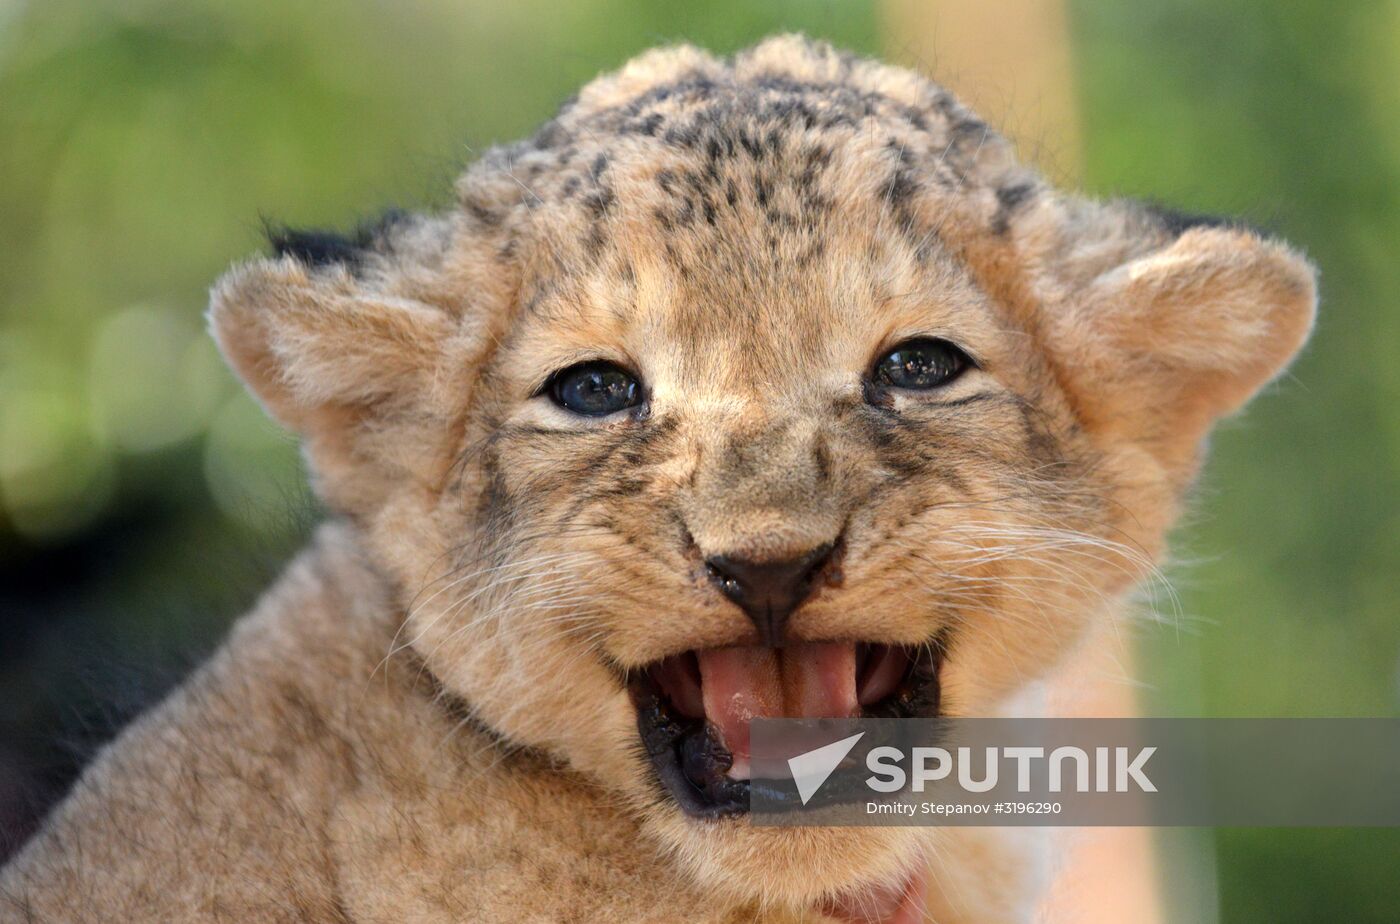 One of two newborn lion cubs shown at Stavropol Zoo